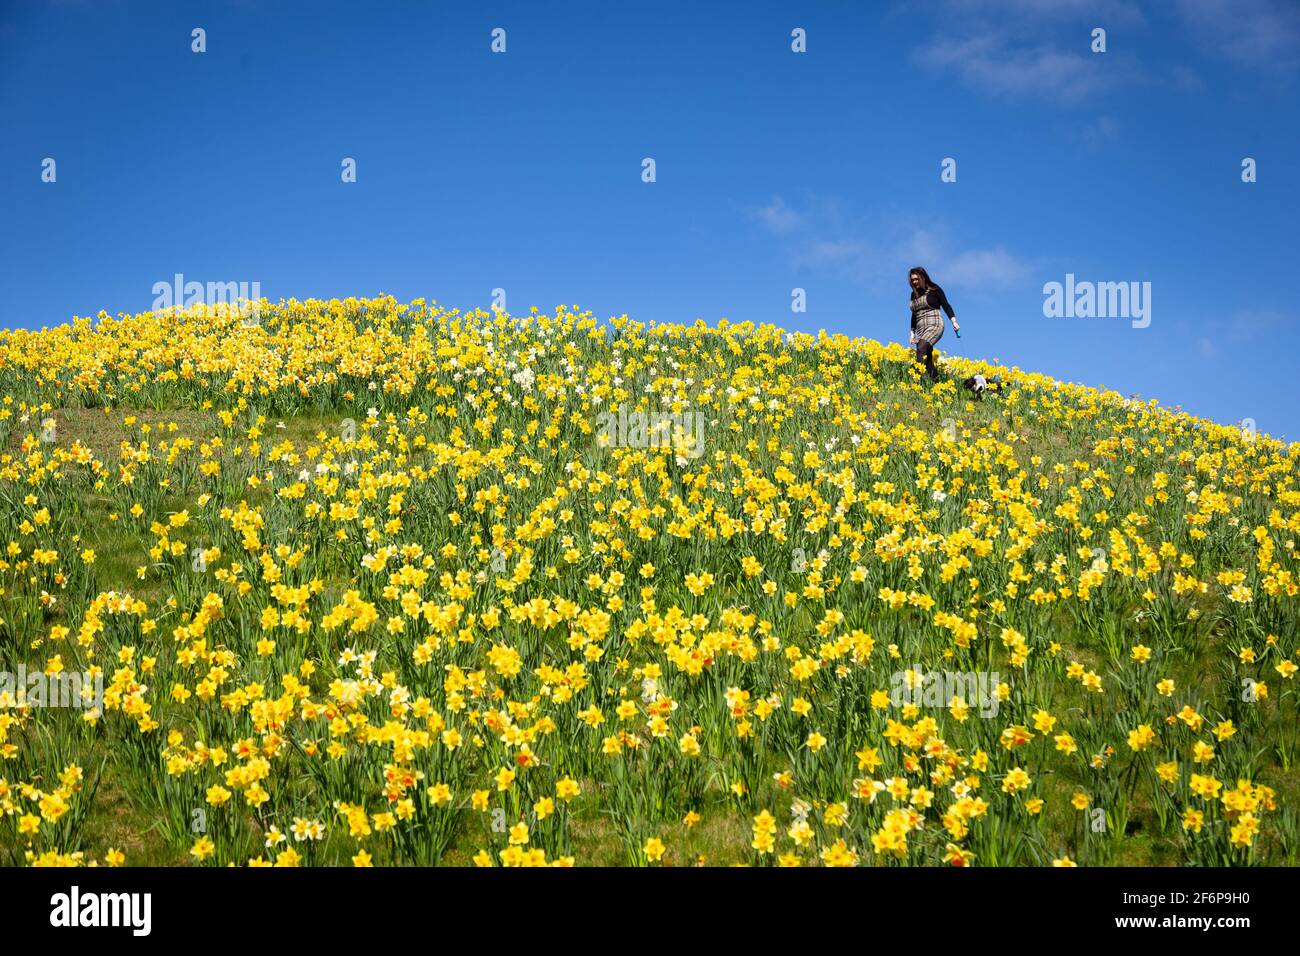 Telford, Shropshire, UK. 2nd Apr, 2021. A woman walks her dog among 170,000 daffodils in Telford town centre. The daffodils were planted in 2018 on Hollingsgate Mound to commemorate the town's 50th anniversary since it came into existence. Each of the 170,000 flowers represents one resident. Credit: Peter Lopeman/Alamy Live News Stock Photo